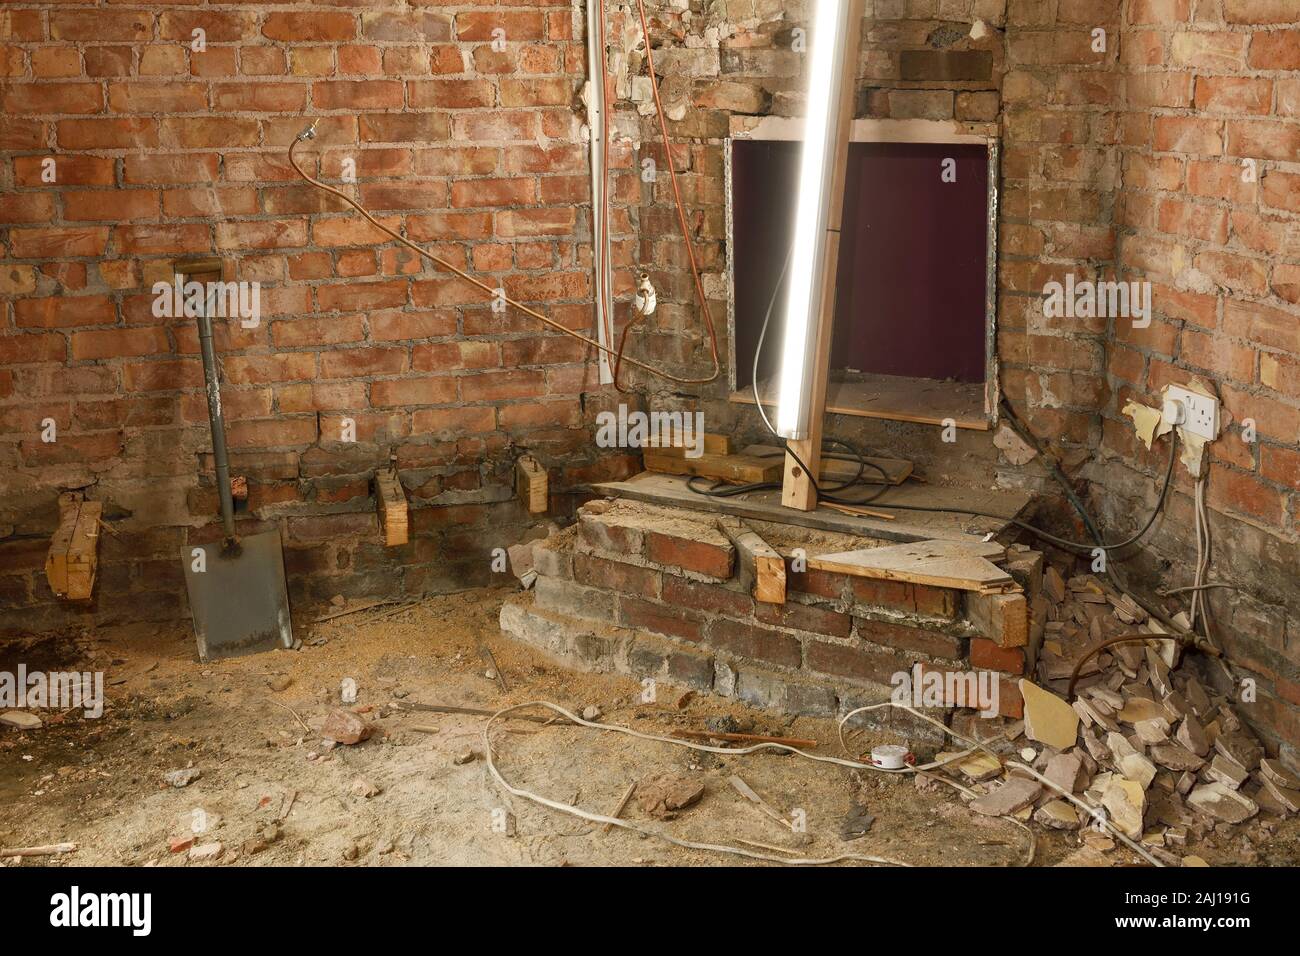 Detail Of A 1930s Property In The Uk Undergoing Extensive Renovation Work With Walls Stripped Back To Brick And A Suspended Timber Floor Removed Stock Photo Alamy